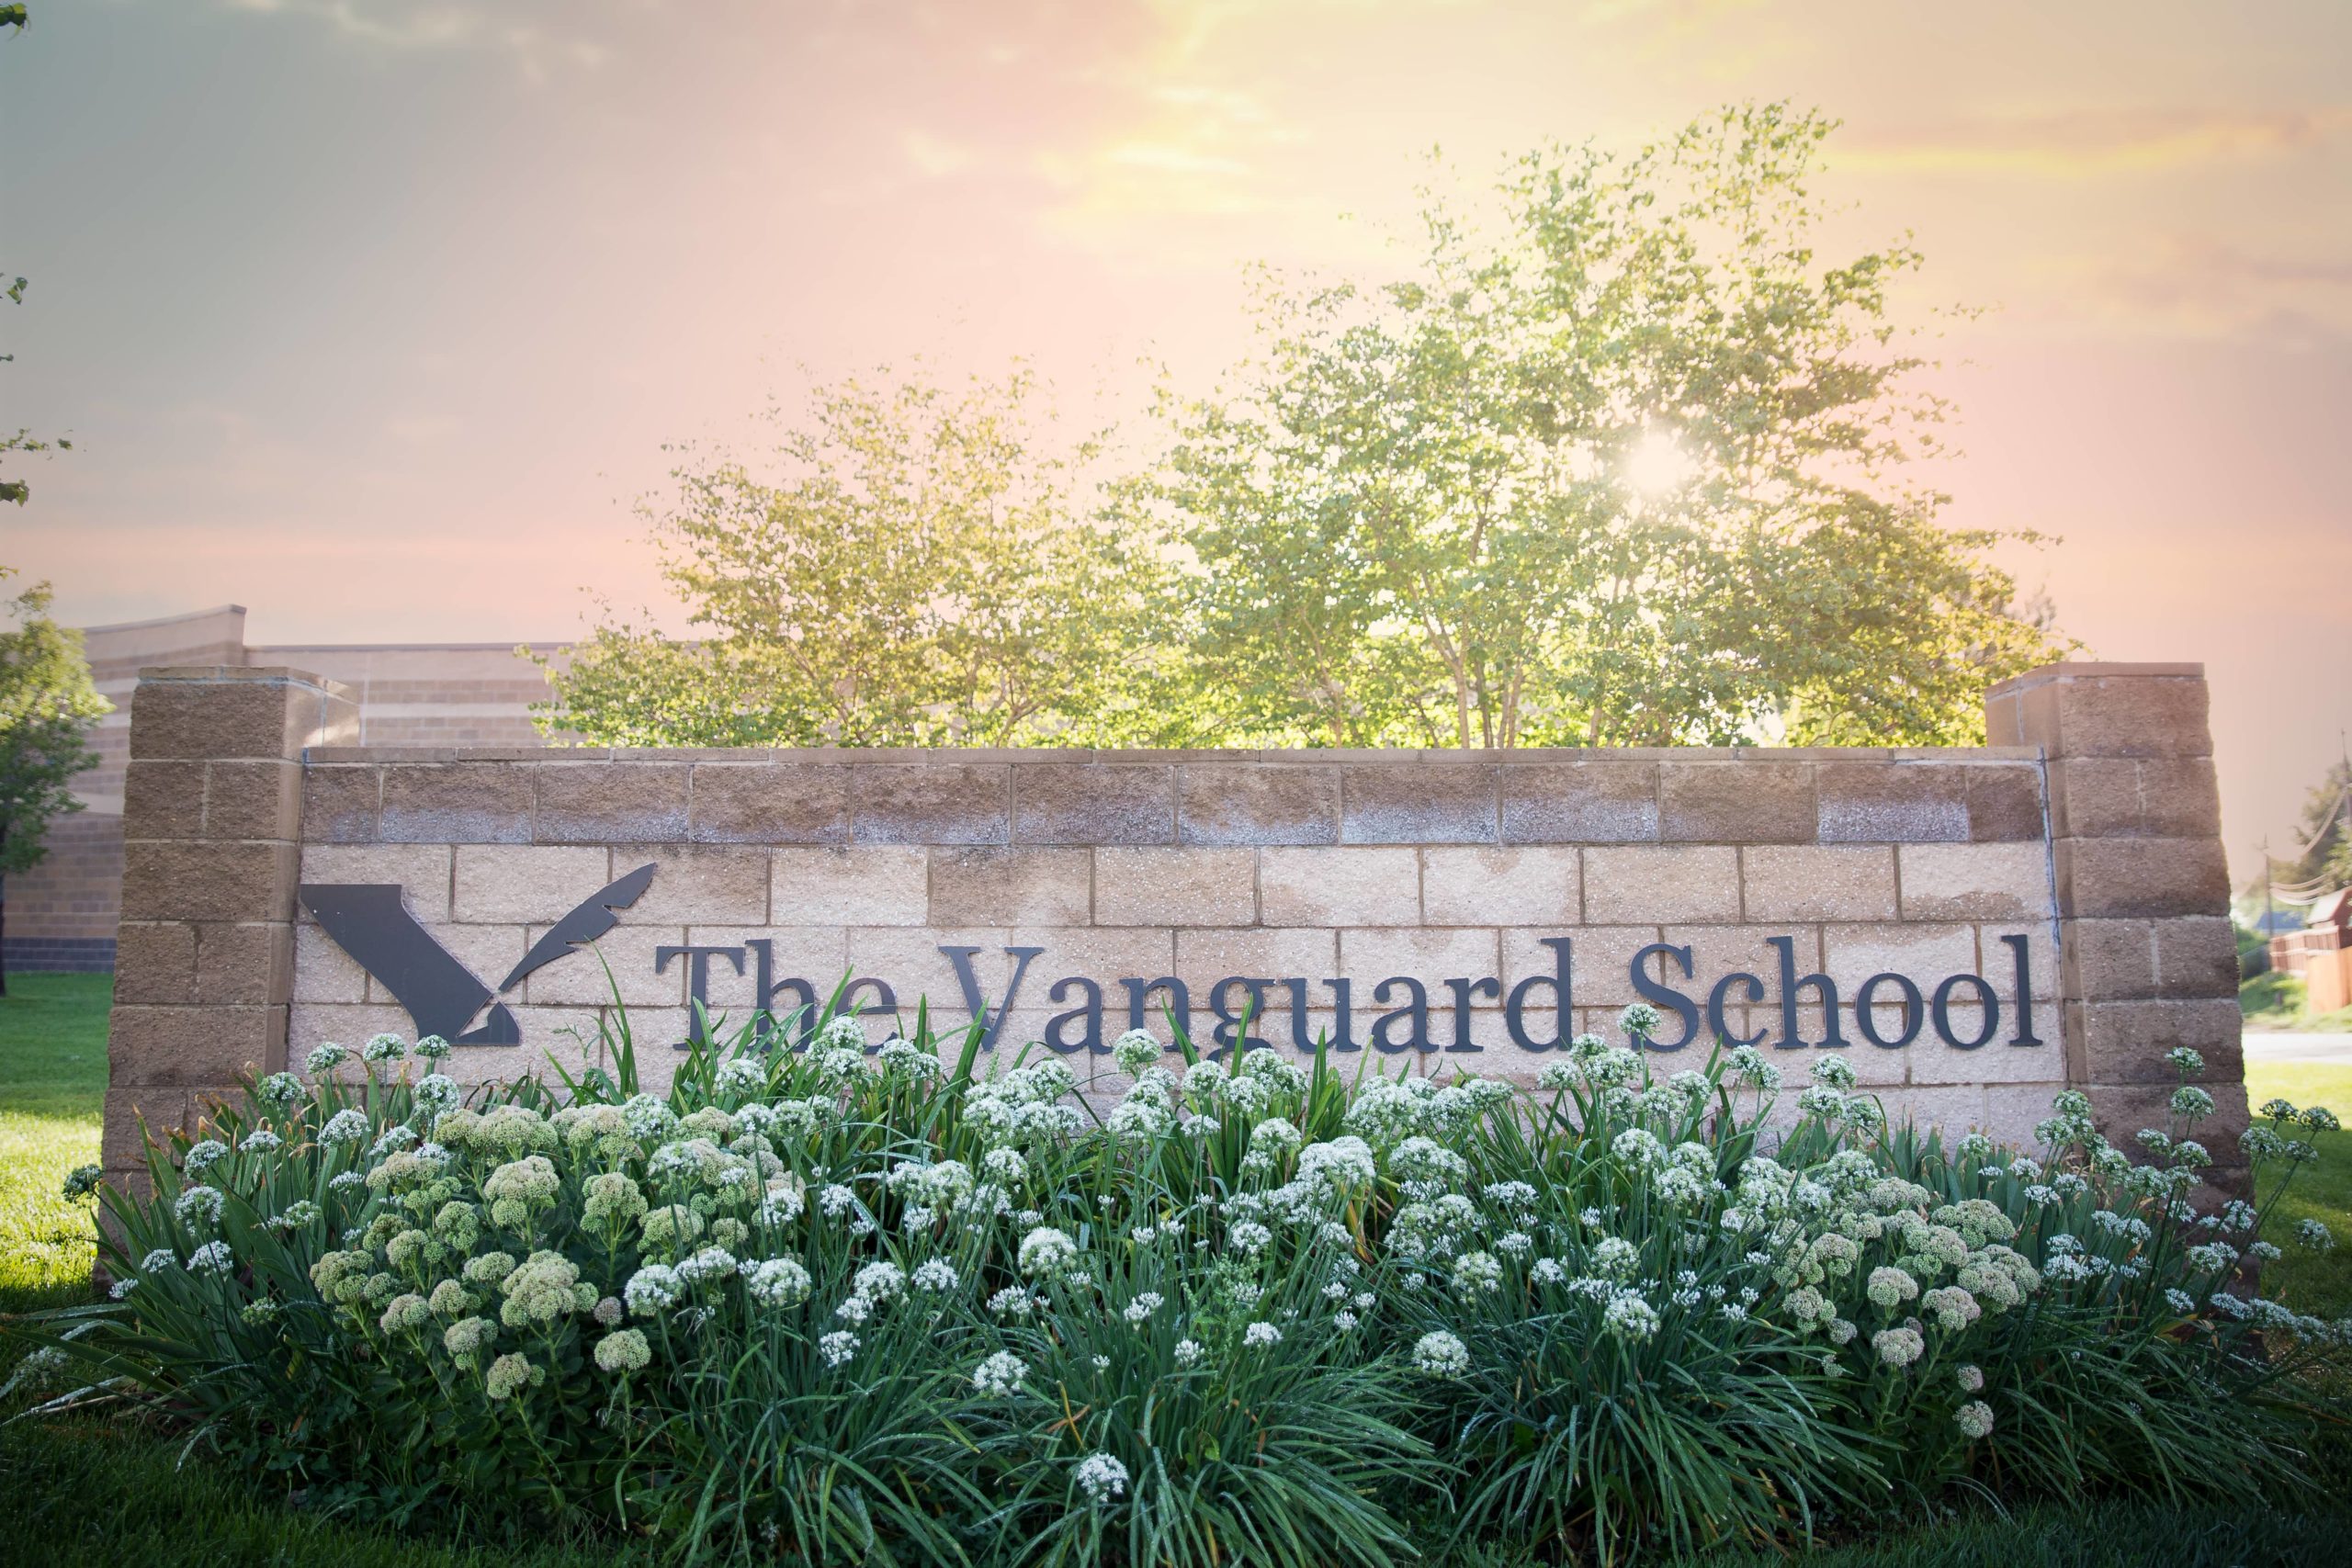 The Vanguard School sign with shrubs and flowers in front